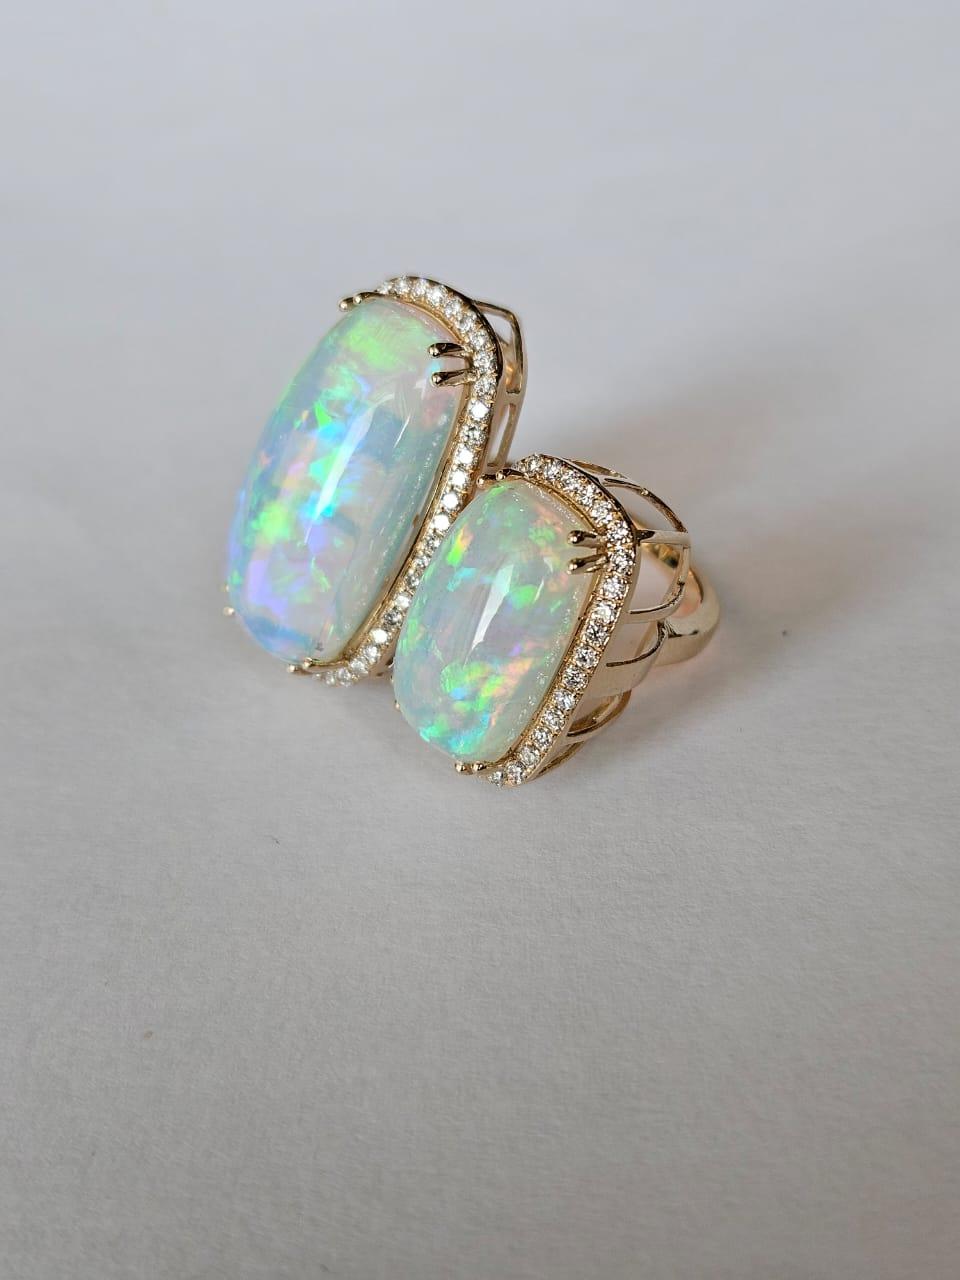 Cabochon Set in 18K Yellow Gold, 14.04 carats, Ethiopian Opal & Diamonds Cocktail Ring For Sale